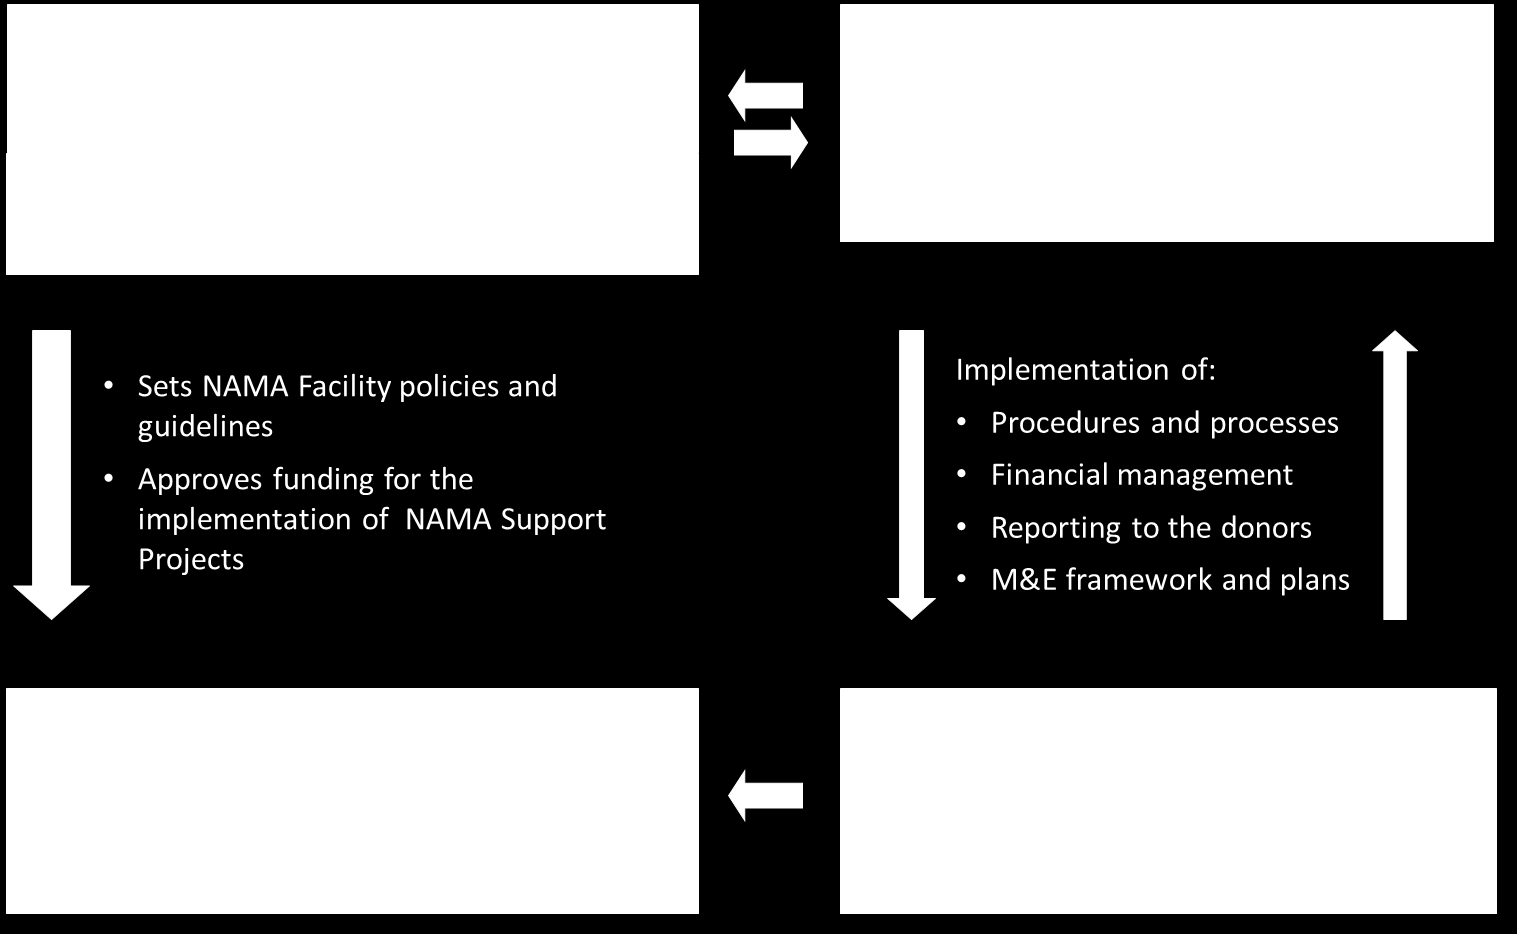 2 NAMA Facility governance and stakeholders The following section includes a short introduction to the overall governance structure of the NAMA Facility and the stakeholders involved in supporting